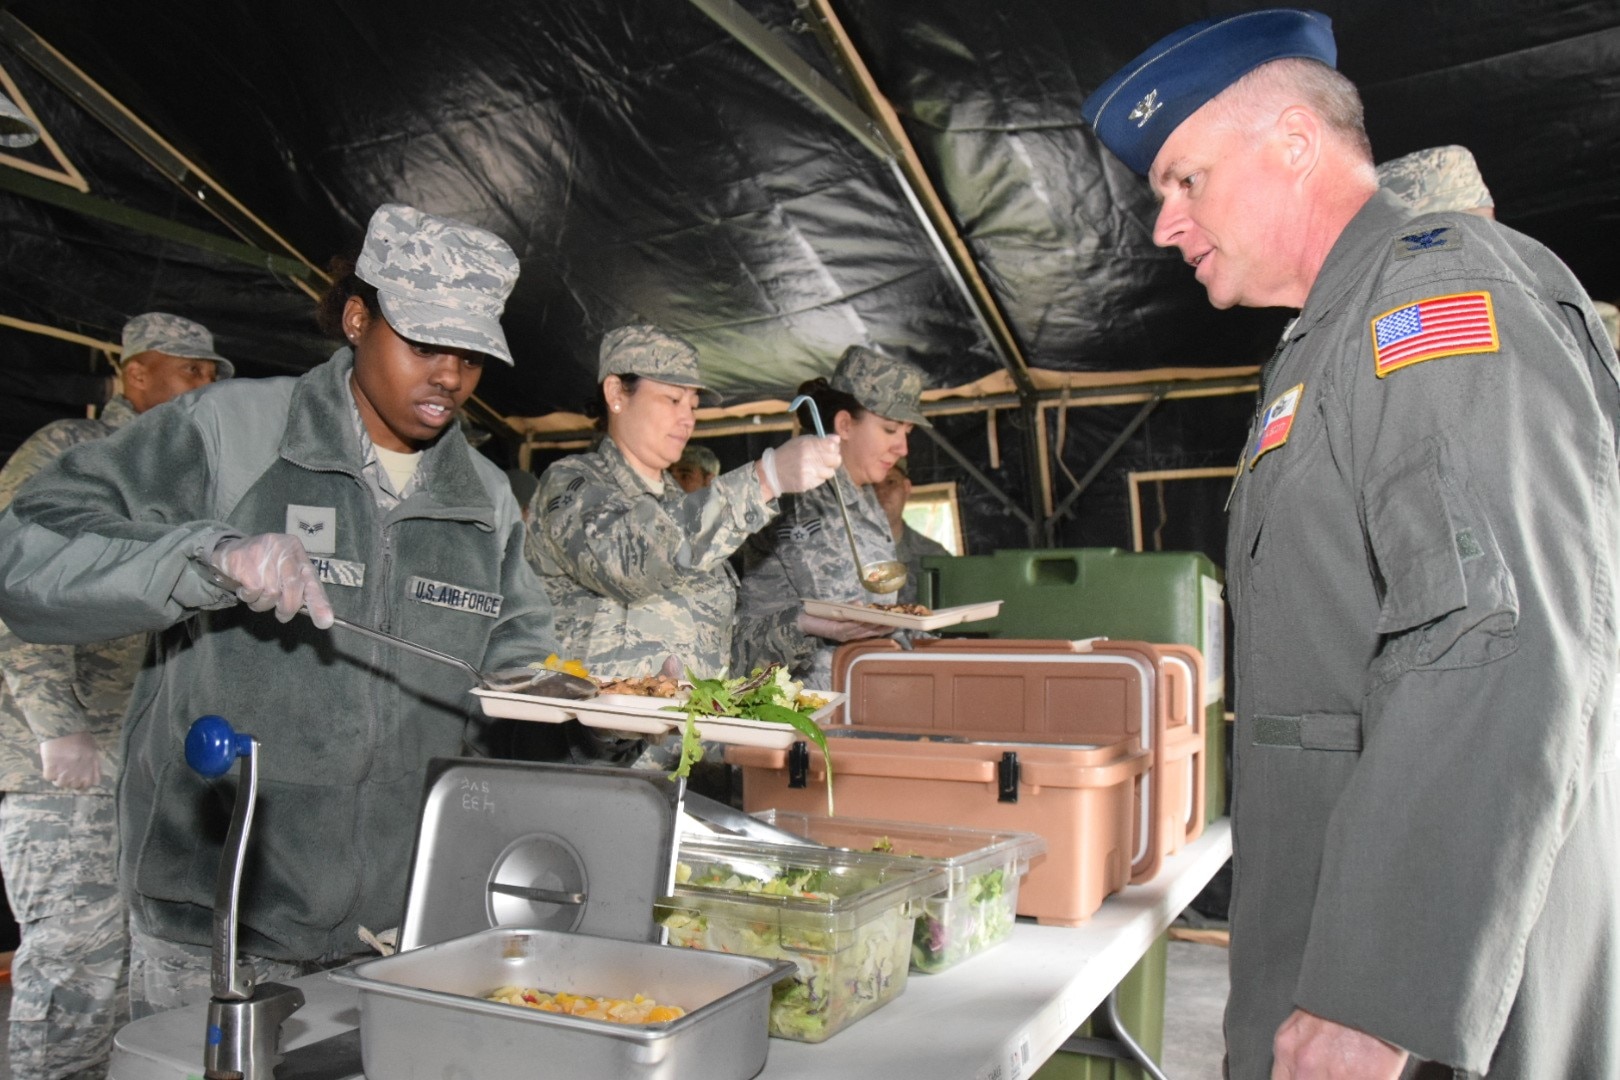 Senior Airman Chelsea Smith, 433rd Force Support Squadron food services specialist, serves lunch to Col. David Scott, 433rd Airlift Wing vice commander, from a Single Pallet Expeditionary Kitchen April 7, 2018. The sustainment flight served a lunch that consisted of southwestern chicken, white rice, garden salad, fruit cocktail and red velvet cake to Alamo Wing leadership. (U.S. Air Force photo by Tech Sgt. Carlos J. Treviño)